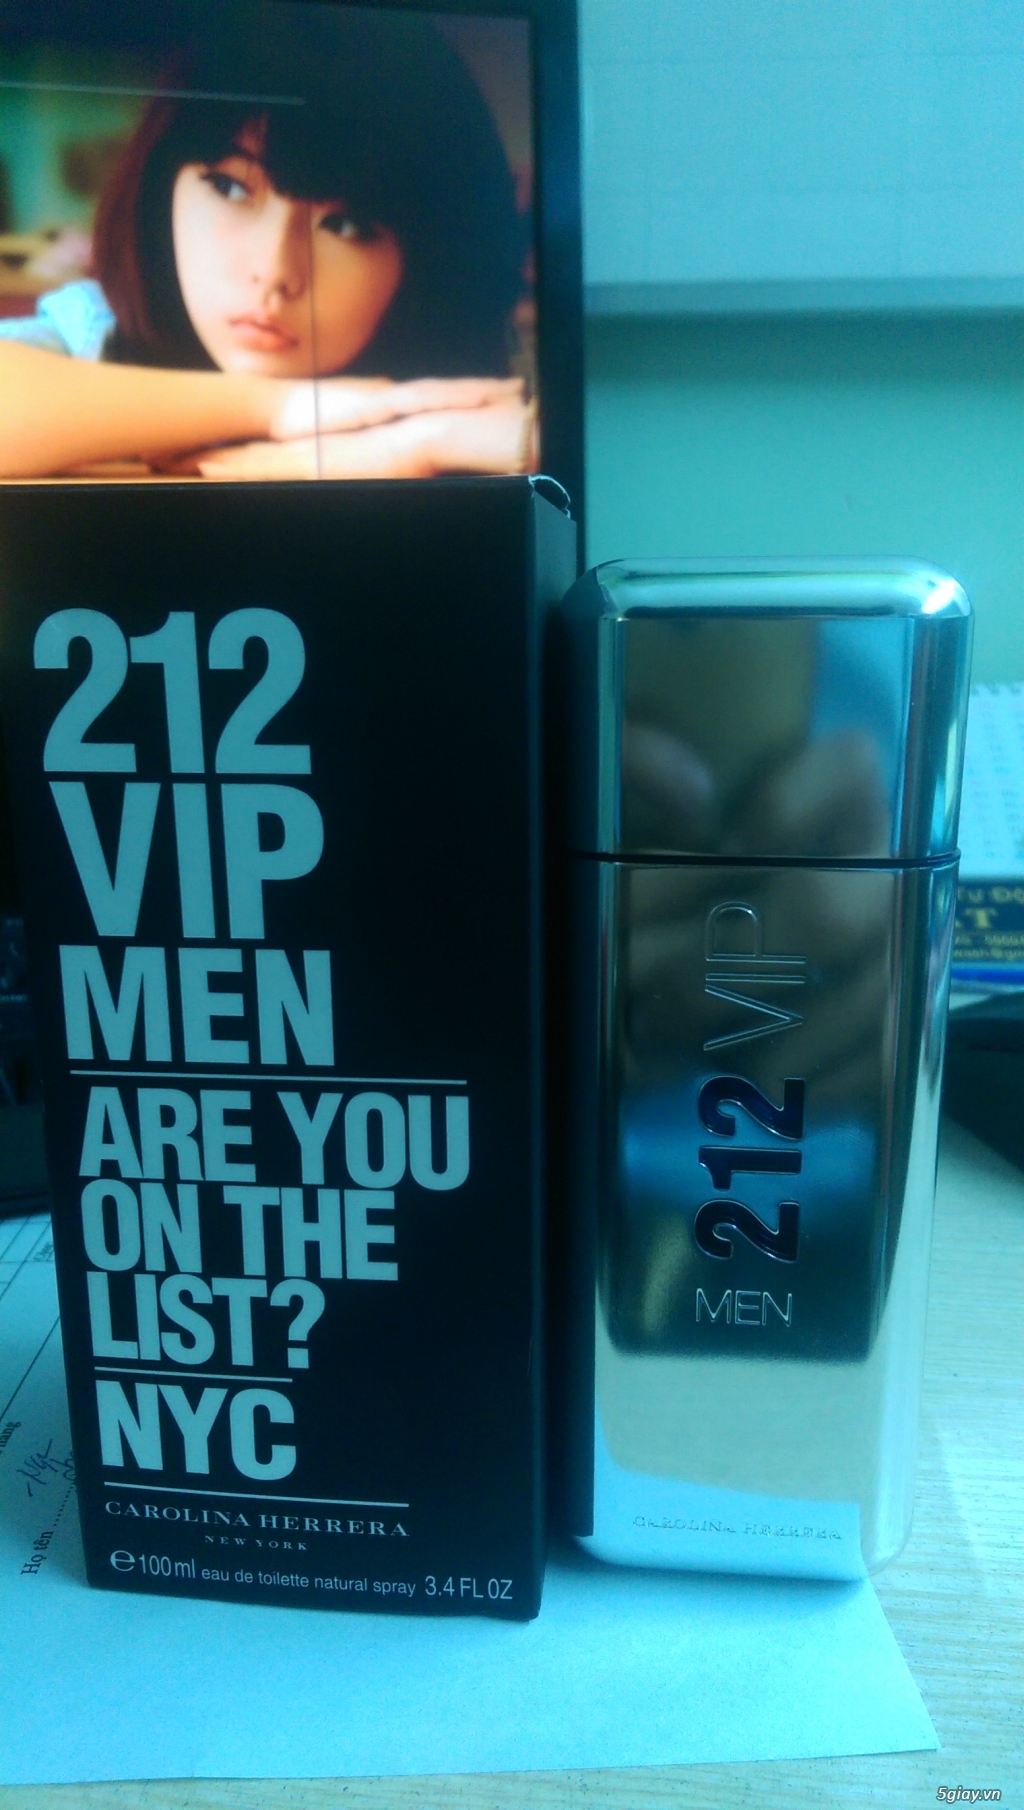 212 VIP MEN Are You On The List ? NYC 1.200.000 vnd